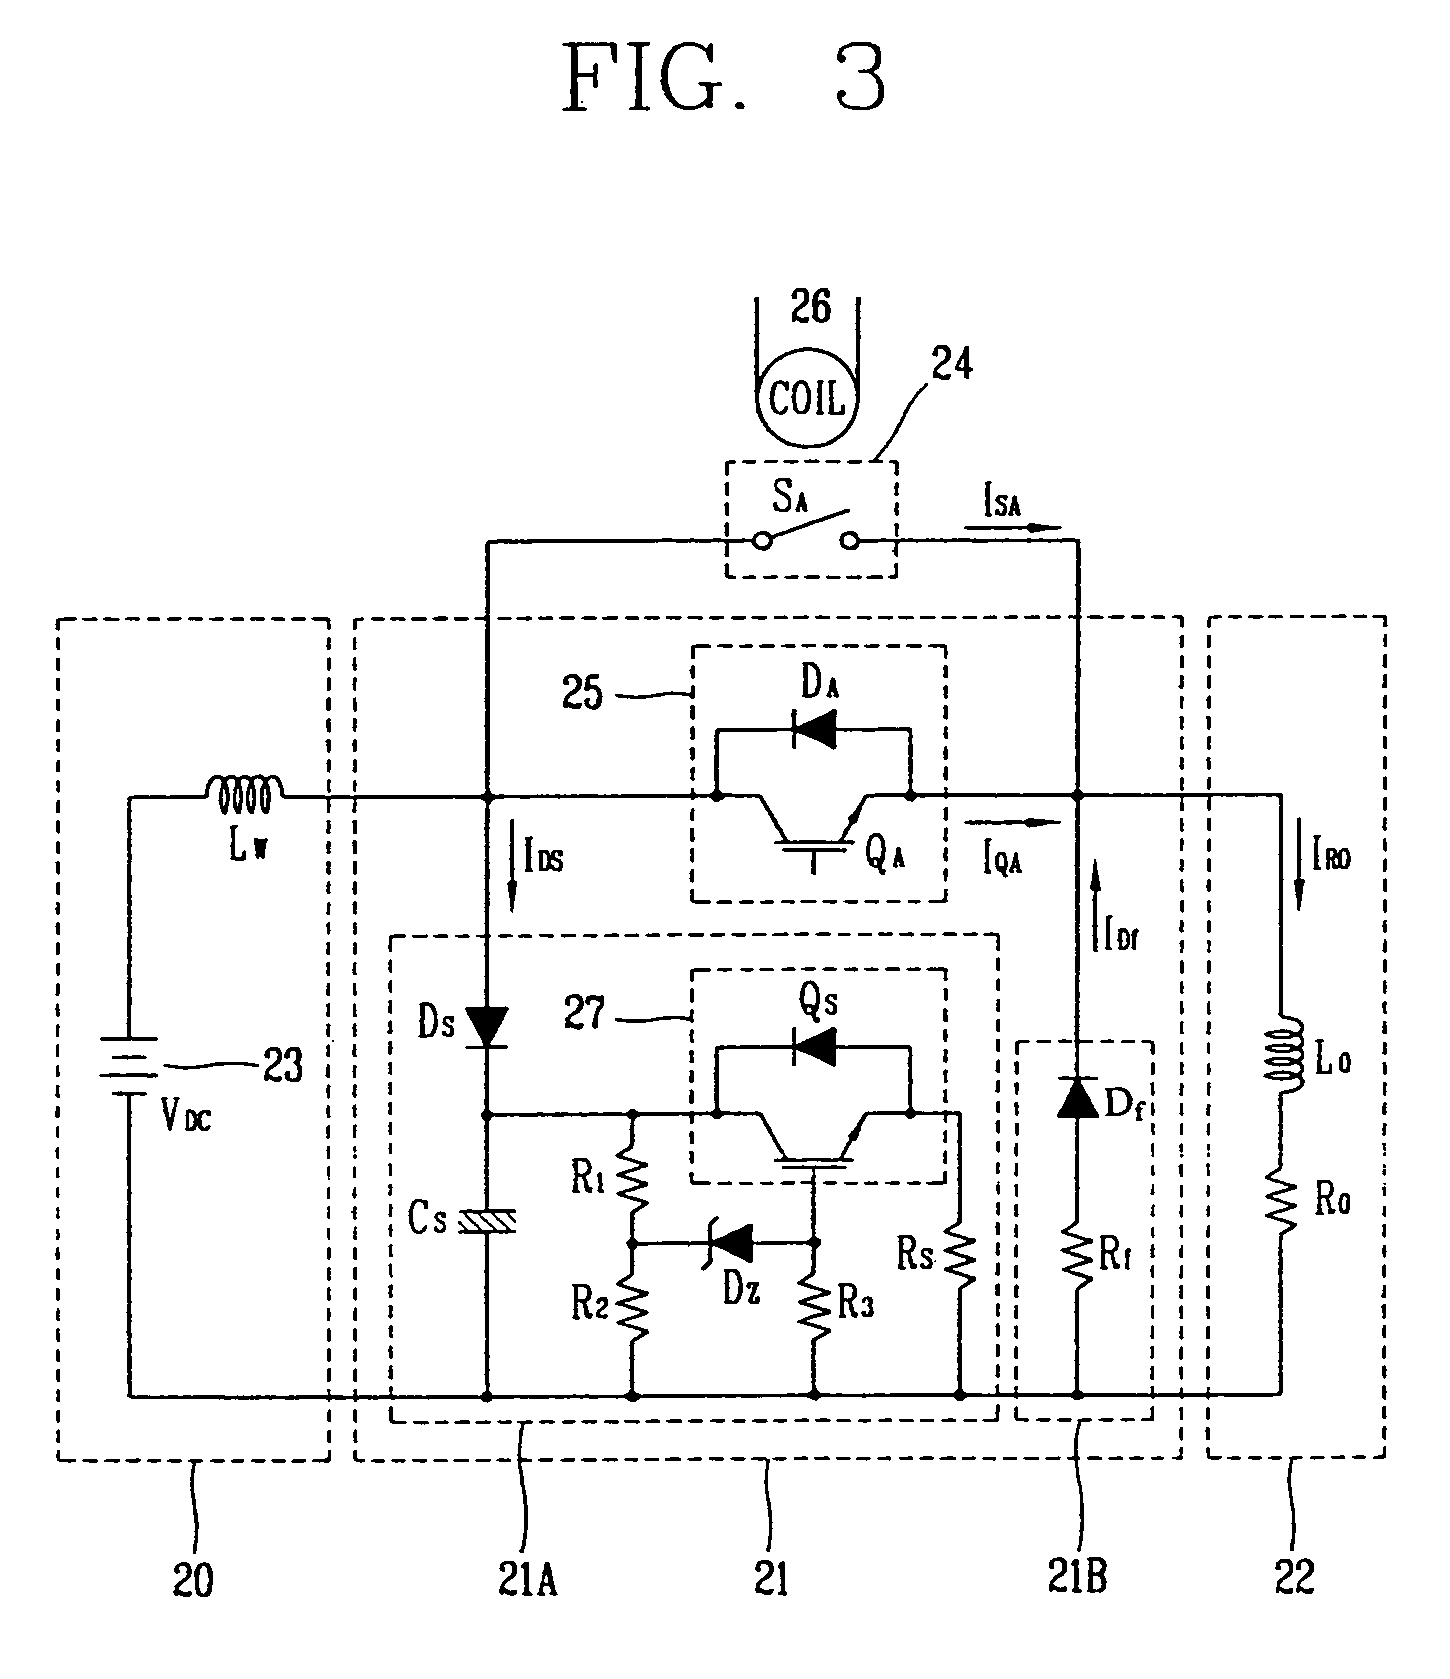 Hybrid DC electromagnetic contactor